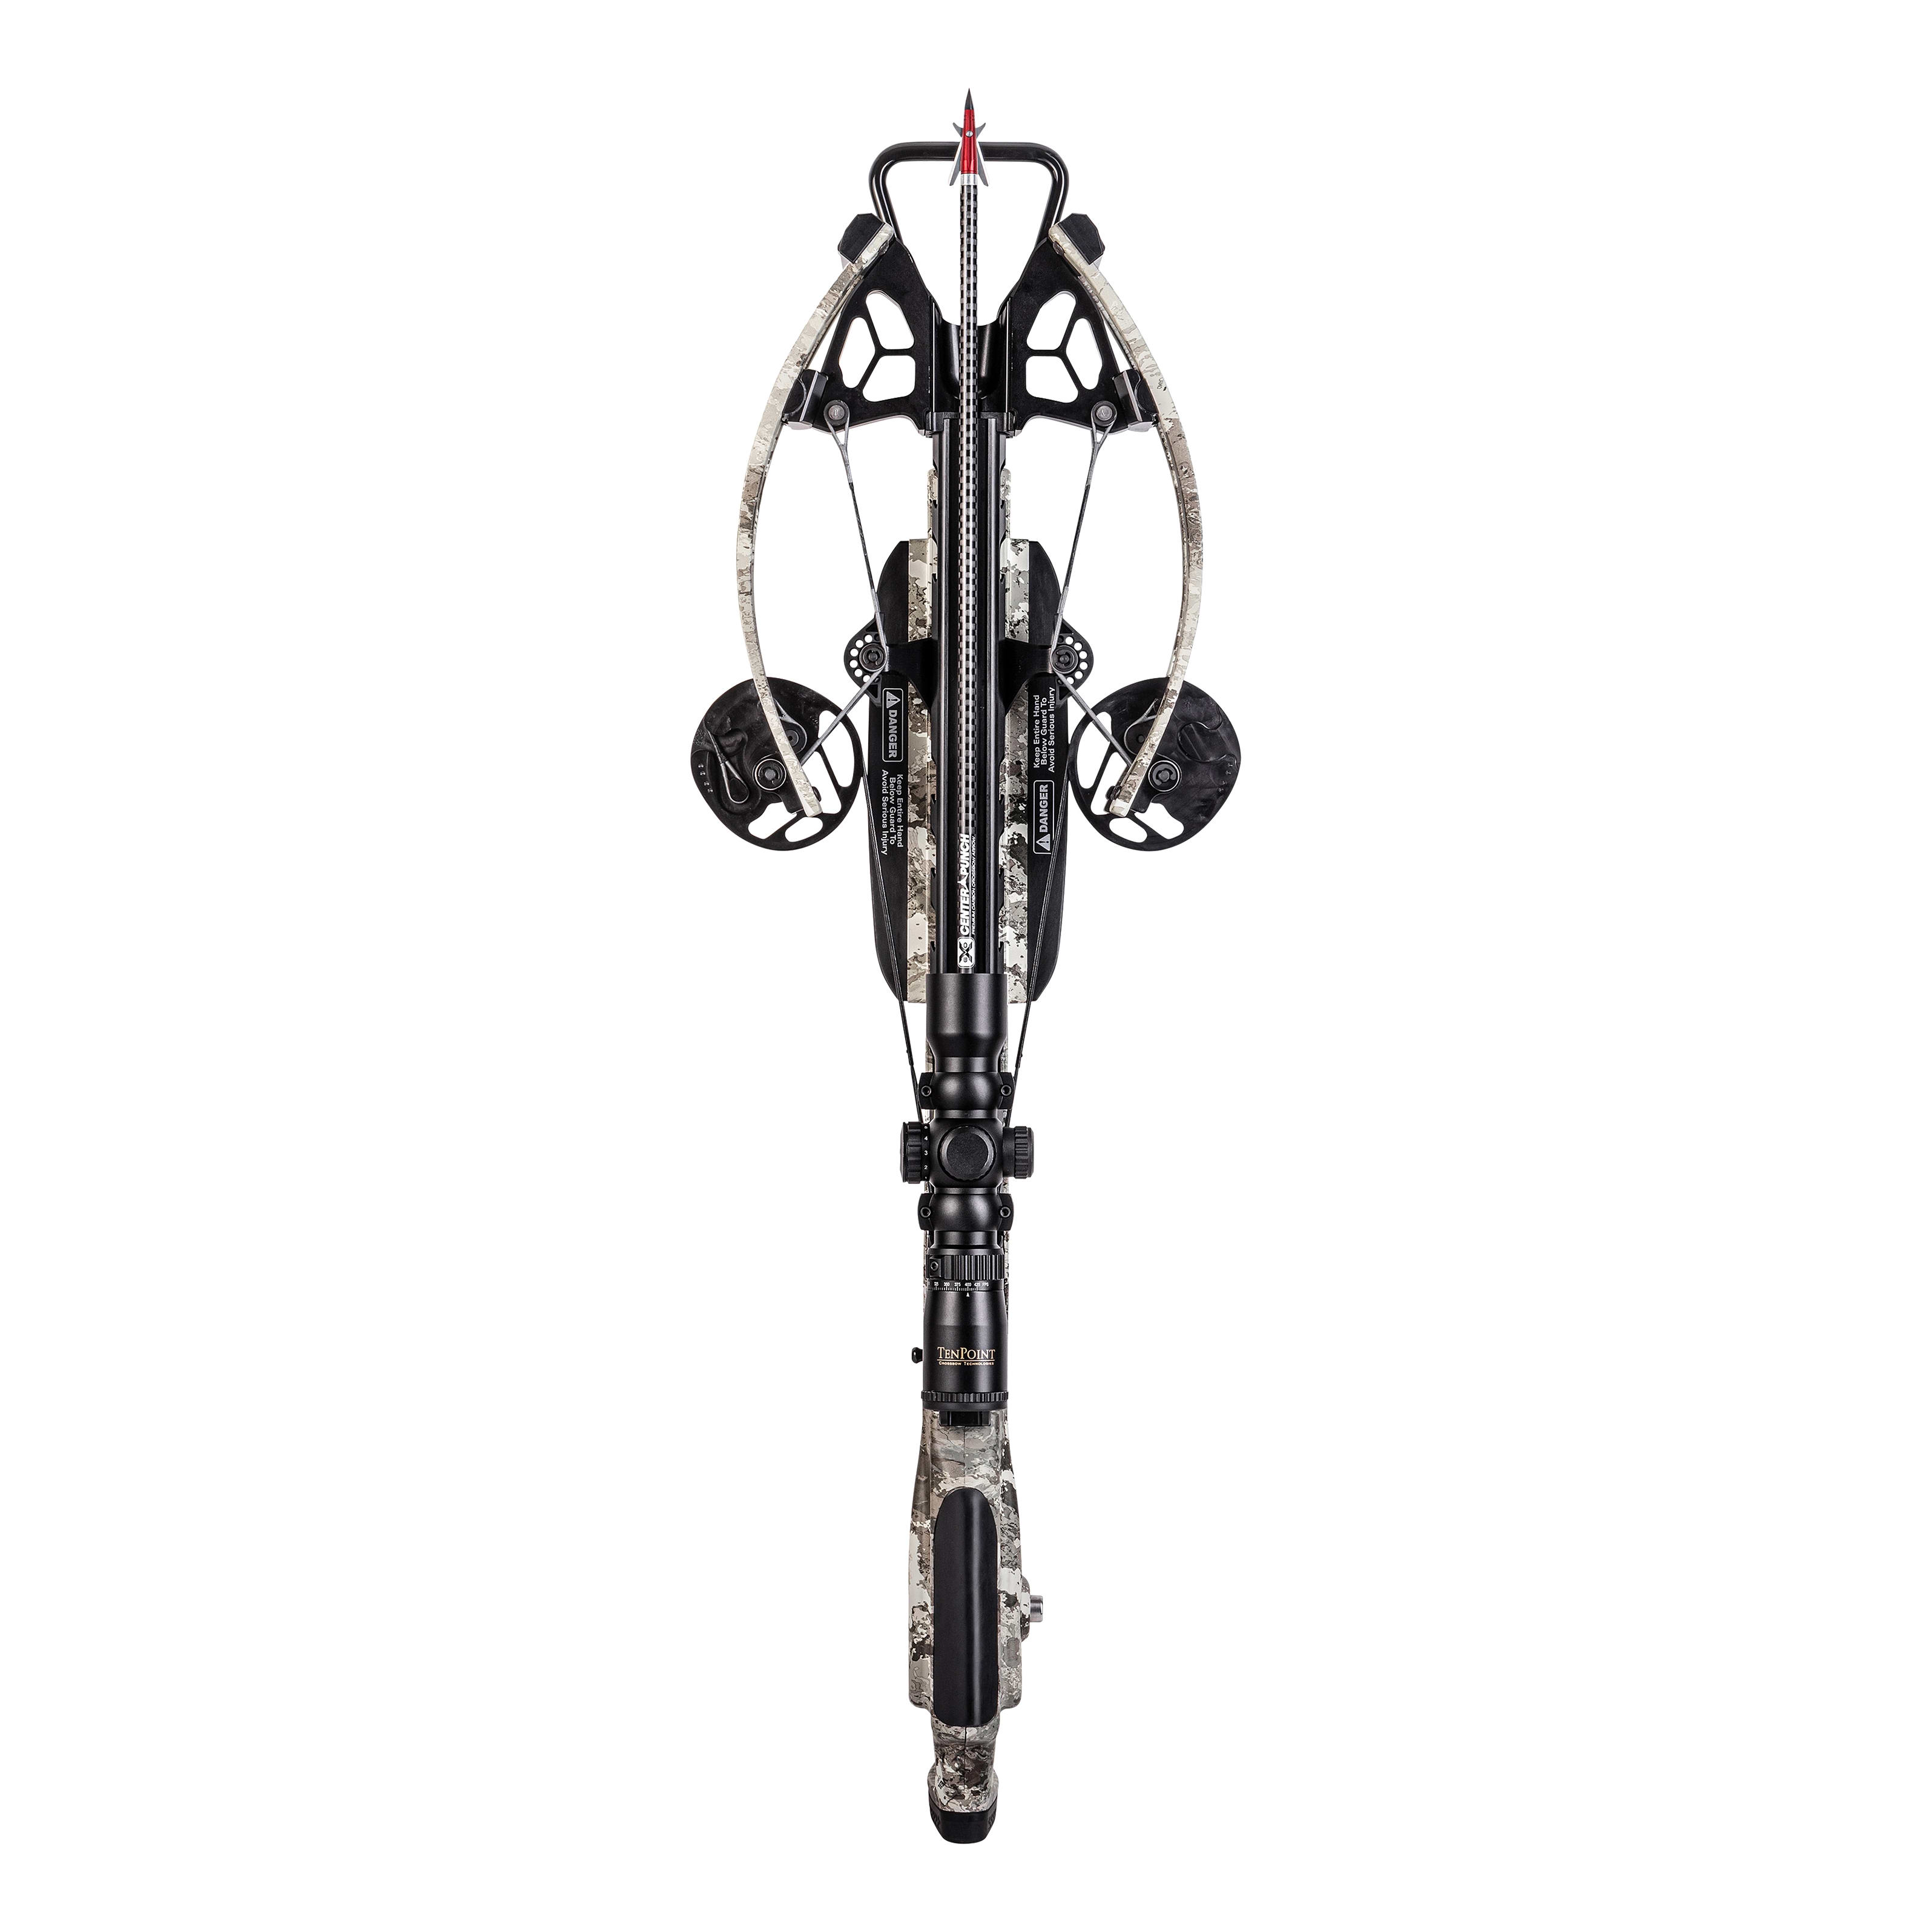 TenPoint® Viper S400™ Crossbow Package with ACUslide - top